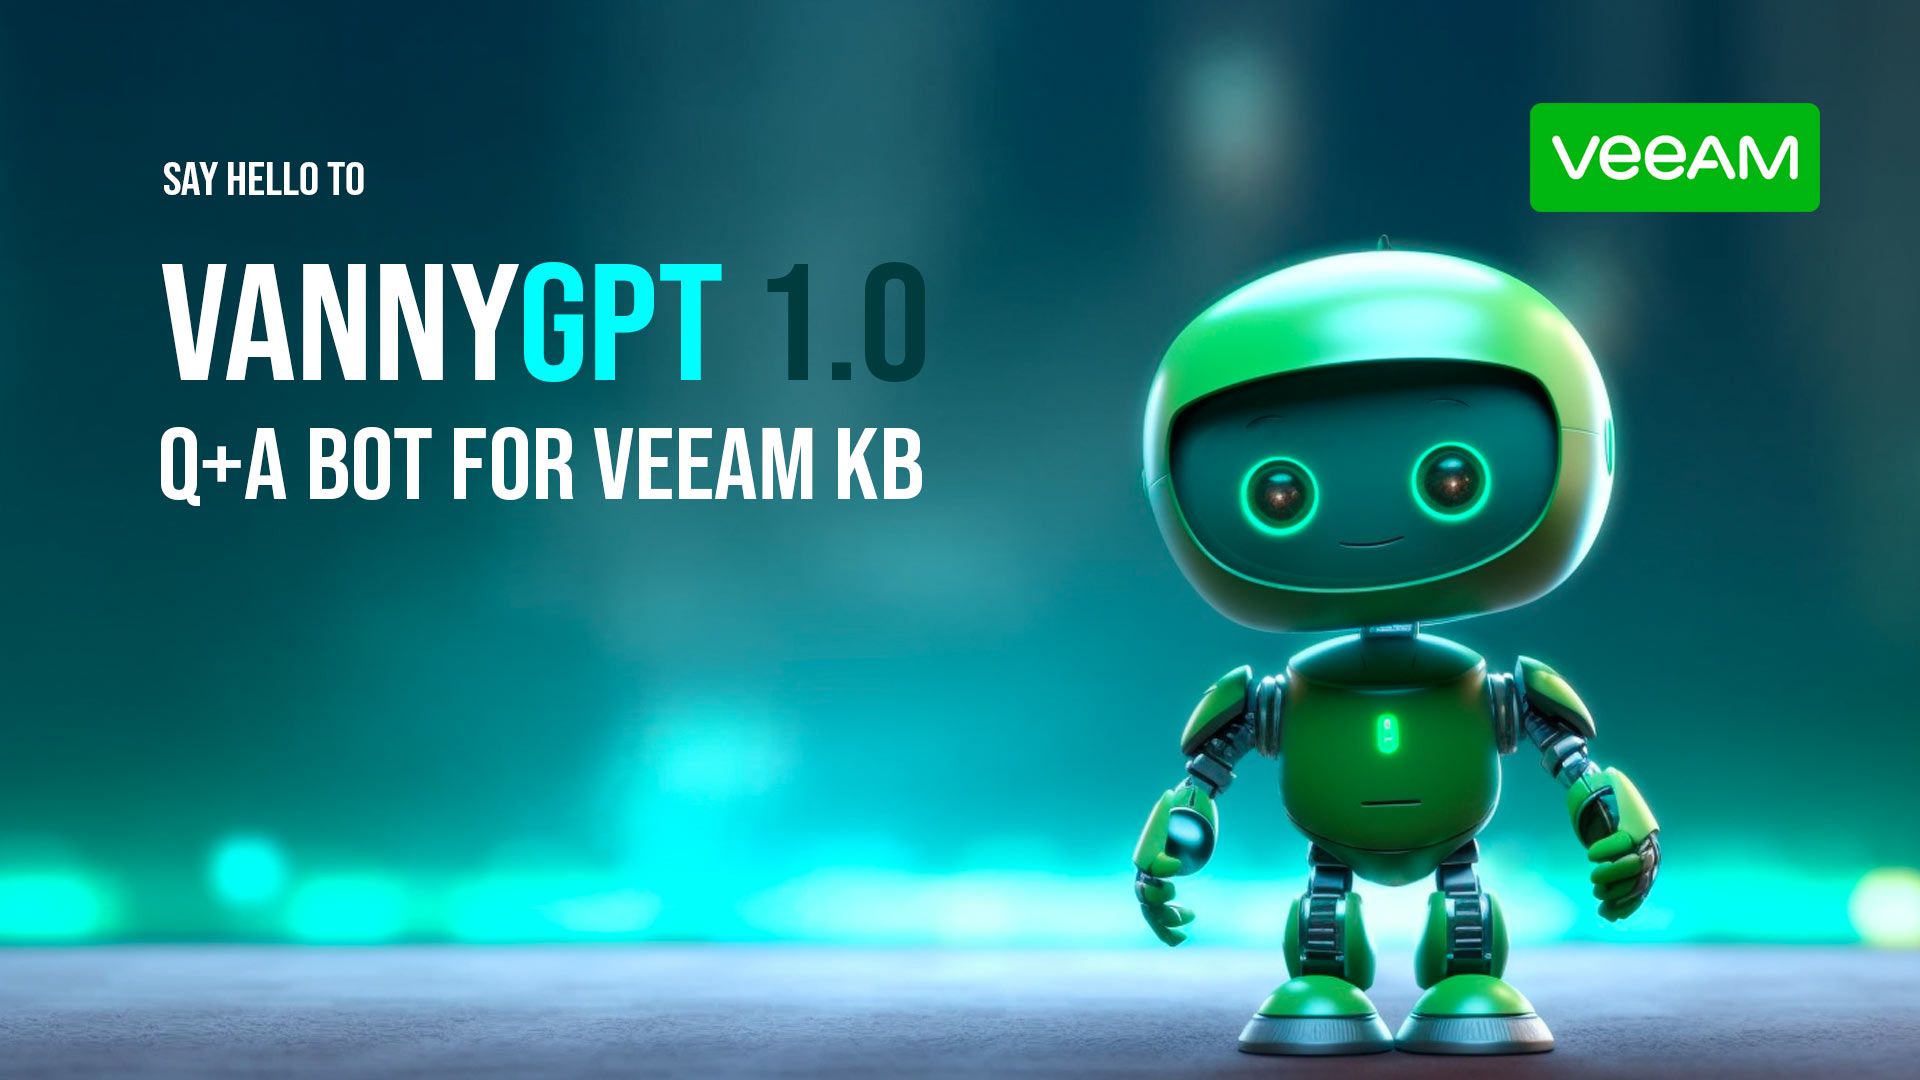 VannyGPT 1.0, a Chatbot for the Veeam KB data